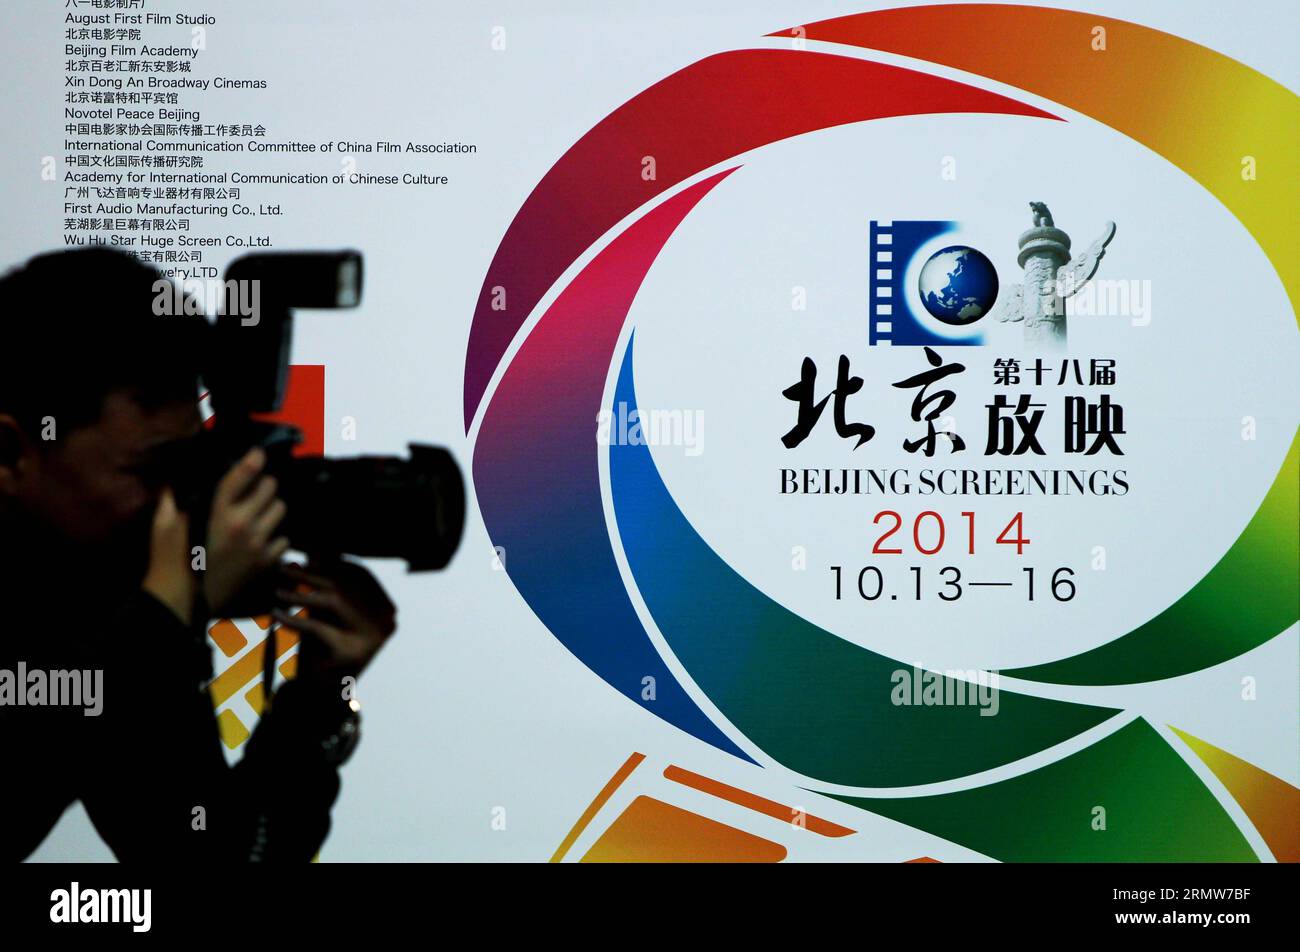 (141009) -- BEIJING, Oct. 9, 2014 -- A journalist takes photos at a press conference of the 18th Beijing Screenings held in Beijing, capital of China, Oct. 9, 2014. The 18th Beijing Screenings will open from Oct. 13 to 16 in Beijing. 60 excellent Chinese films that marks the achievements of China s movie will be screened. ) (wyl) CHINA-BEIJING-18TH BEIJING SCREENINGS (CN) GaoxJing PUBLICATIONxNOTxINxCHN   Beijing OCT 9 2014 a Journalist Takes Photos AT a Press Conference of The 18th Beijing Screening Hero in Beijing Capital of China OCT 9 2014 The 18th Beijing Screening will Open from OCT 13 t Stock Photo